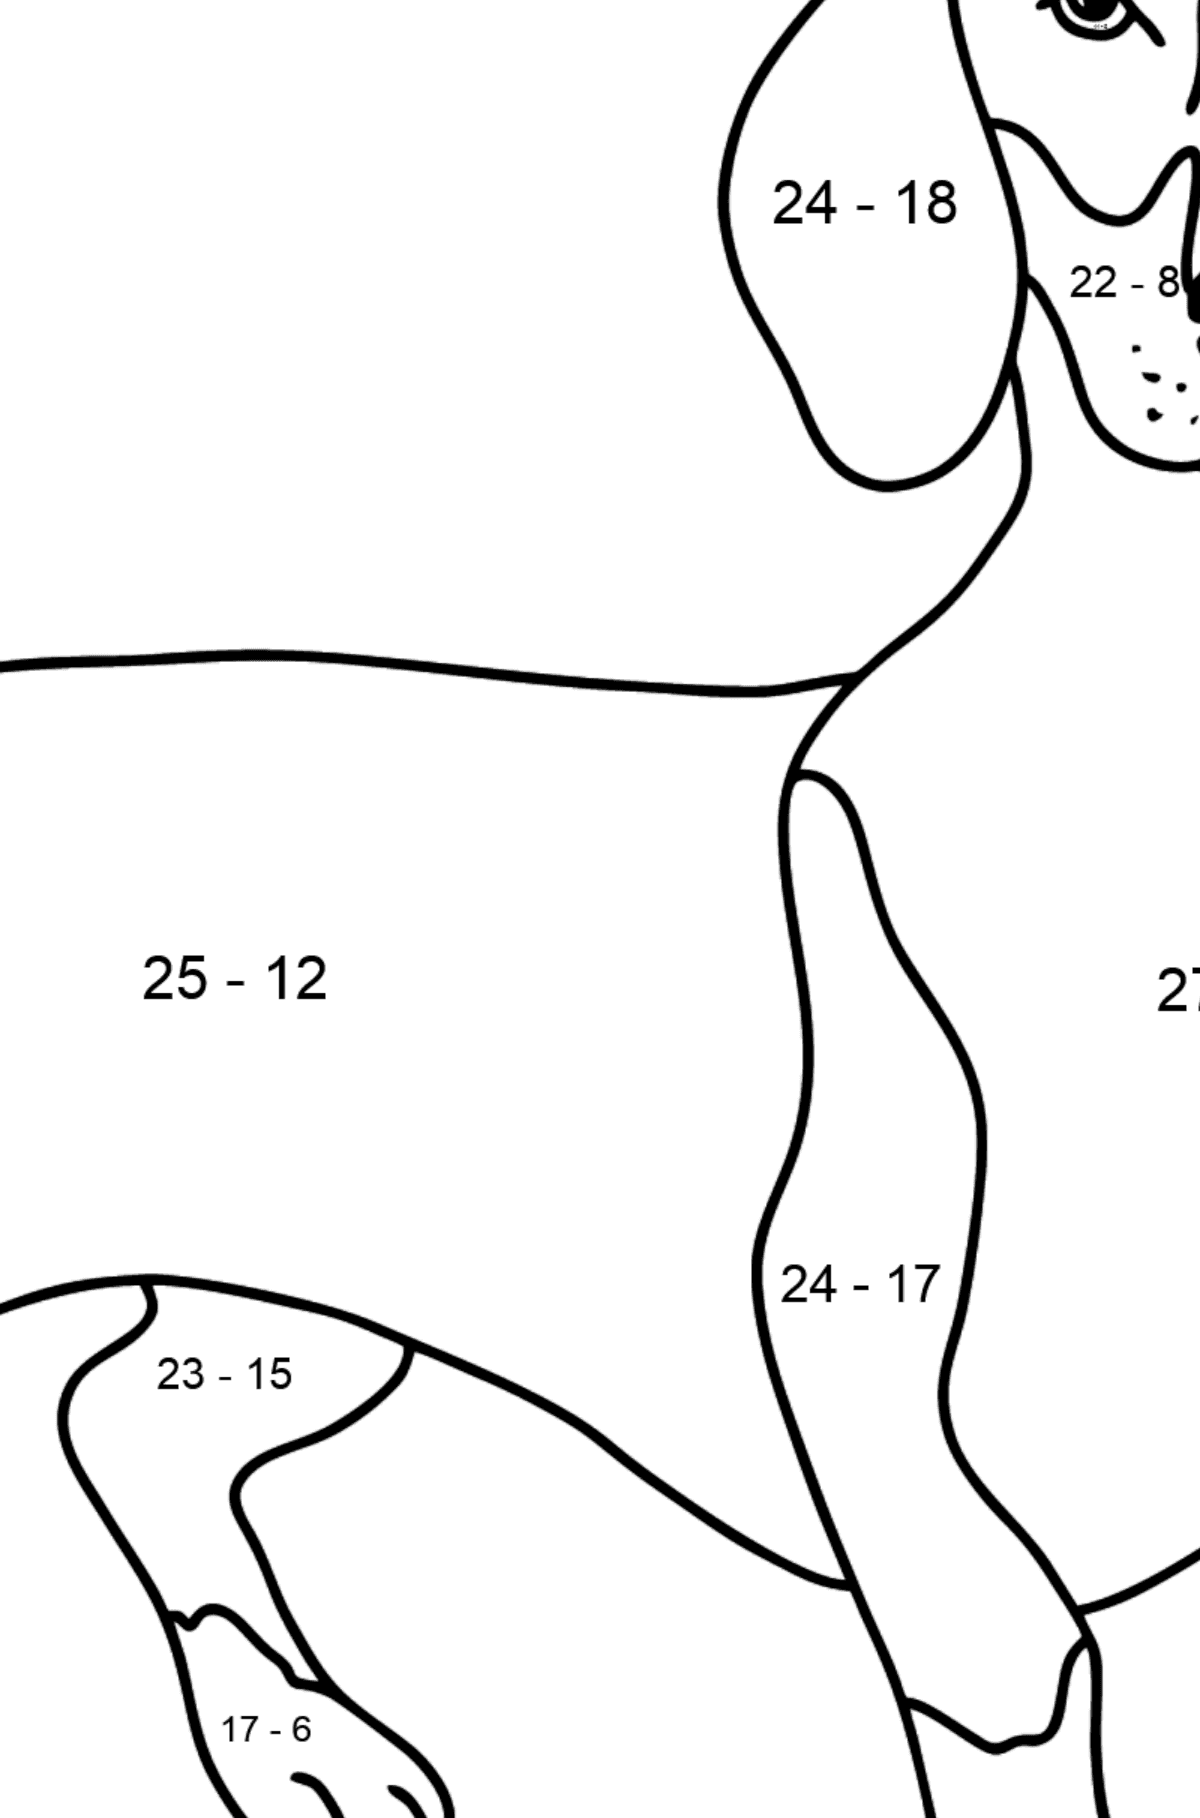 Dachshund coloring page - Math Coloring - Subtraction for Kids